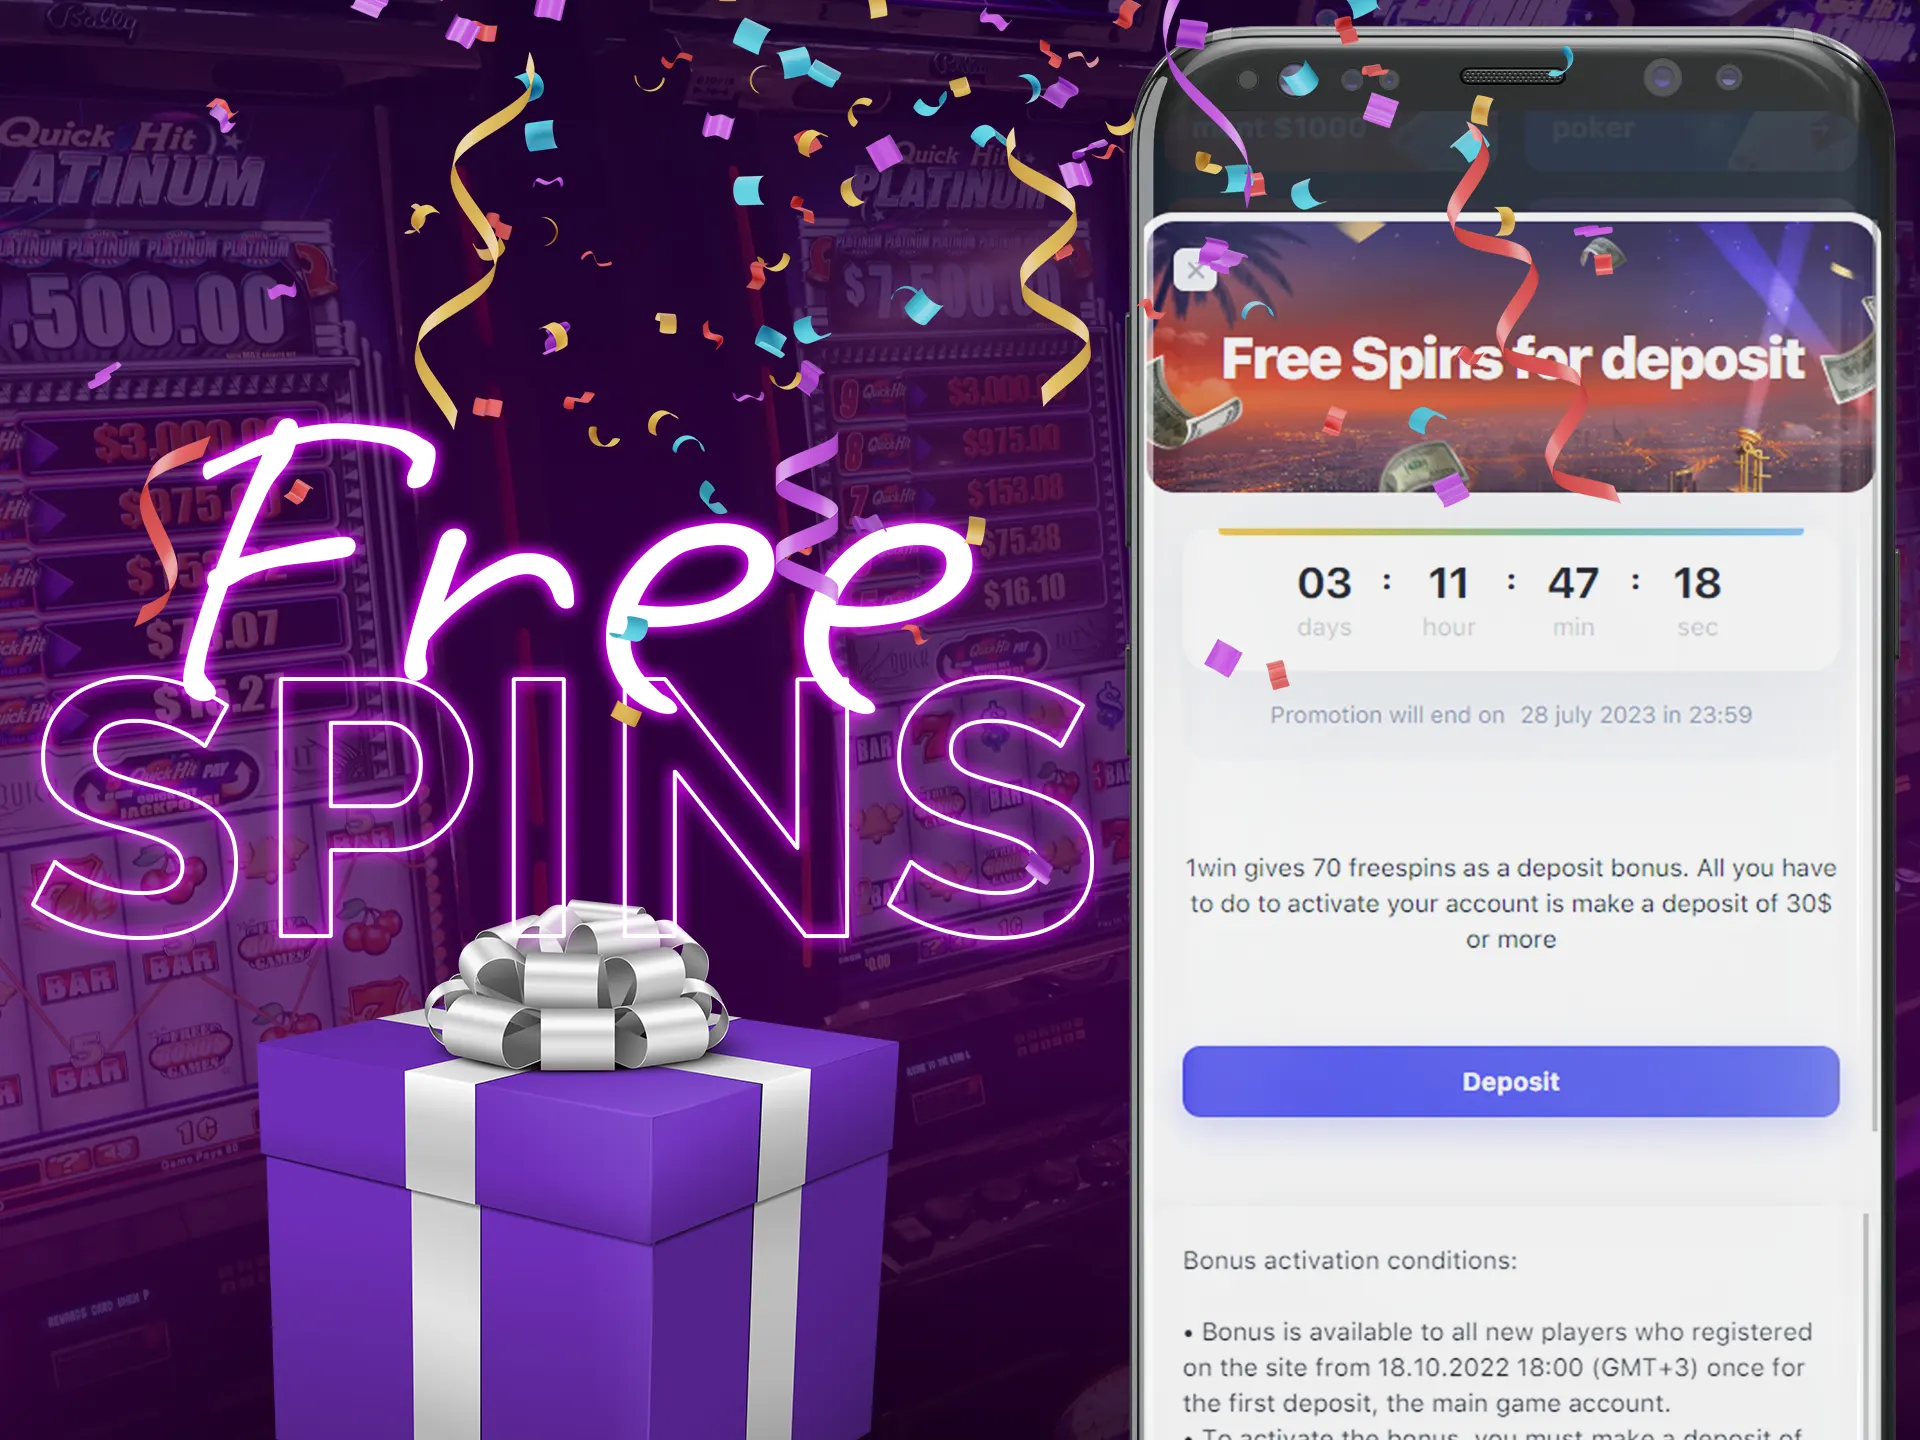 This bonus means that you get a certain number of opportunities to spin the reels for free.